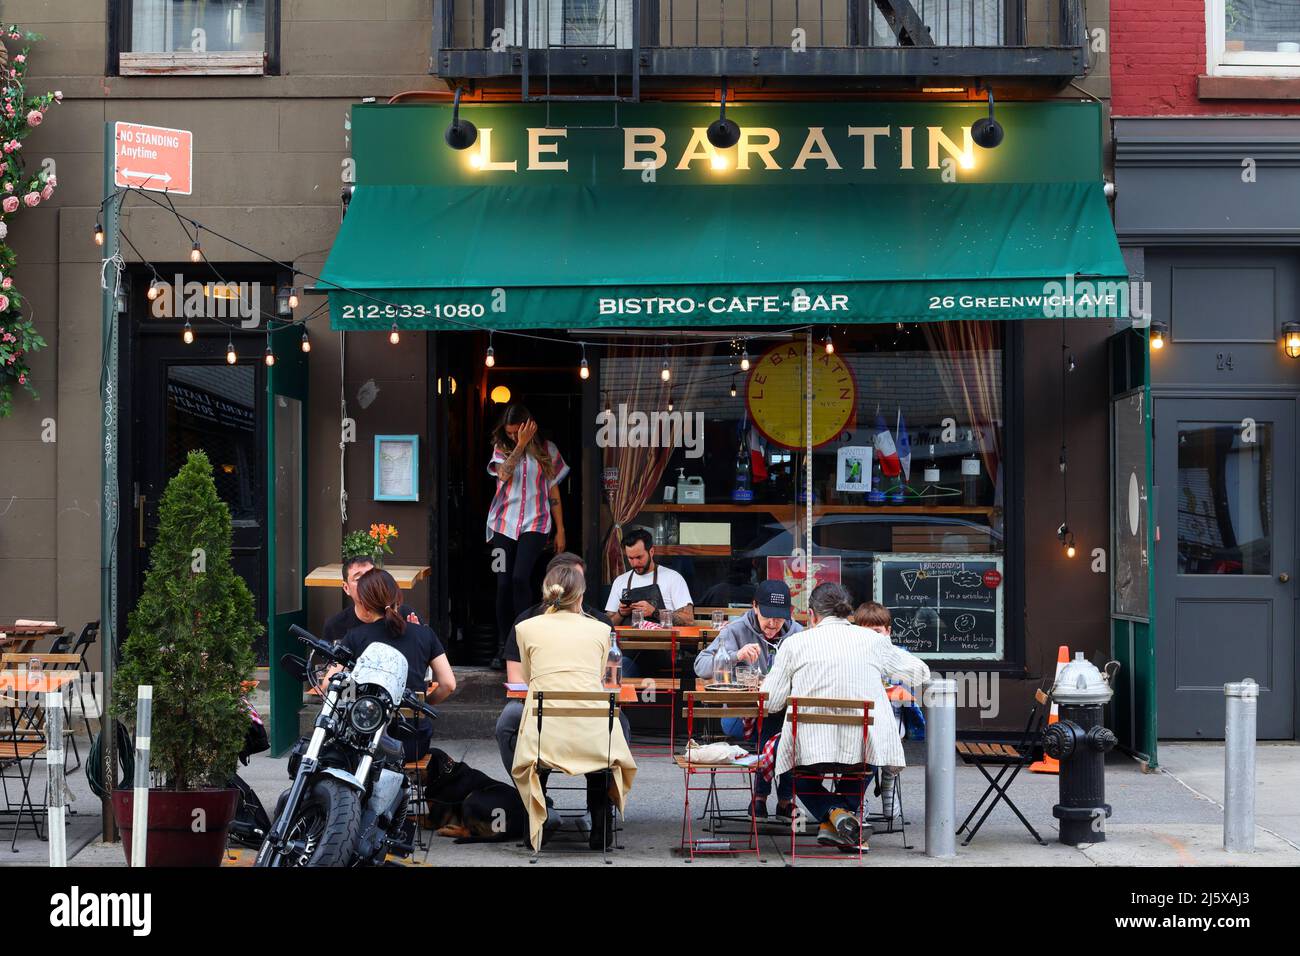 Le Baratin, 26 Greenwich Ave, New York, NYC storefront photo of a French restaurant in the Greenwich Village neighborhood in Manhattan. Stock Photo